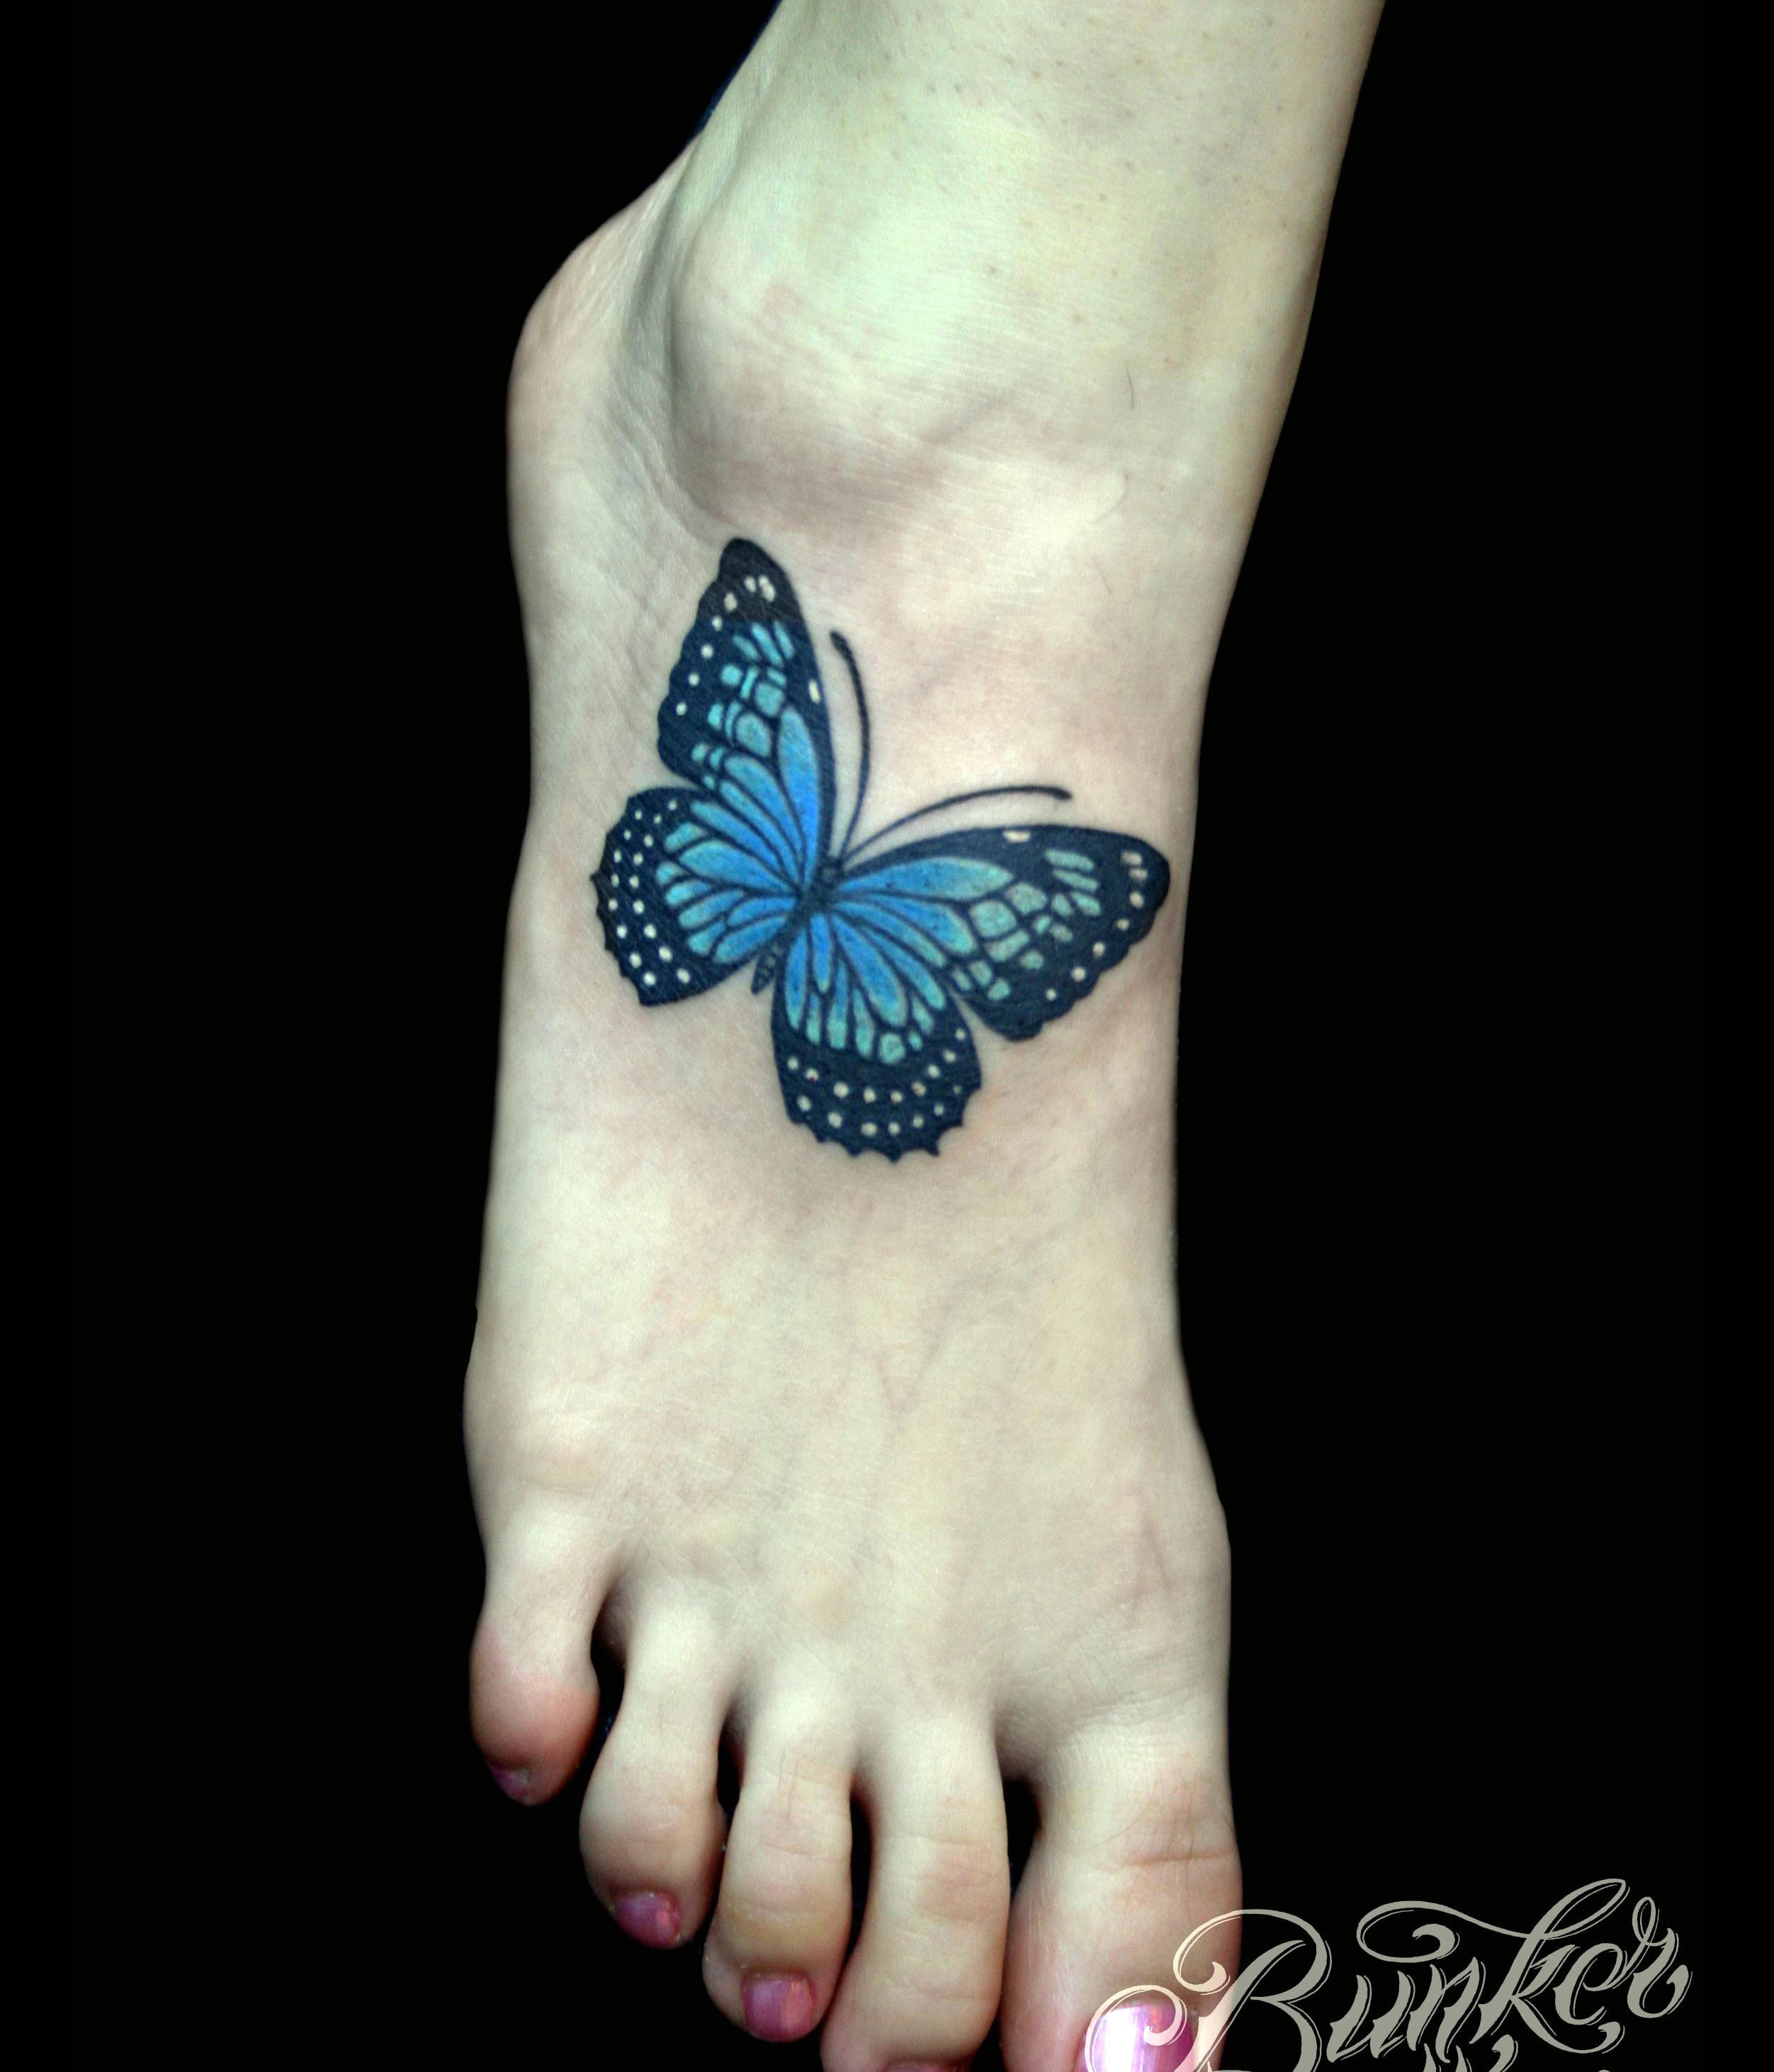 Ulysses Butterfly Tattoo Cool Tattoos Bonbaden Butterfly Tattoos within sizing 2504 X 2924